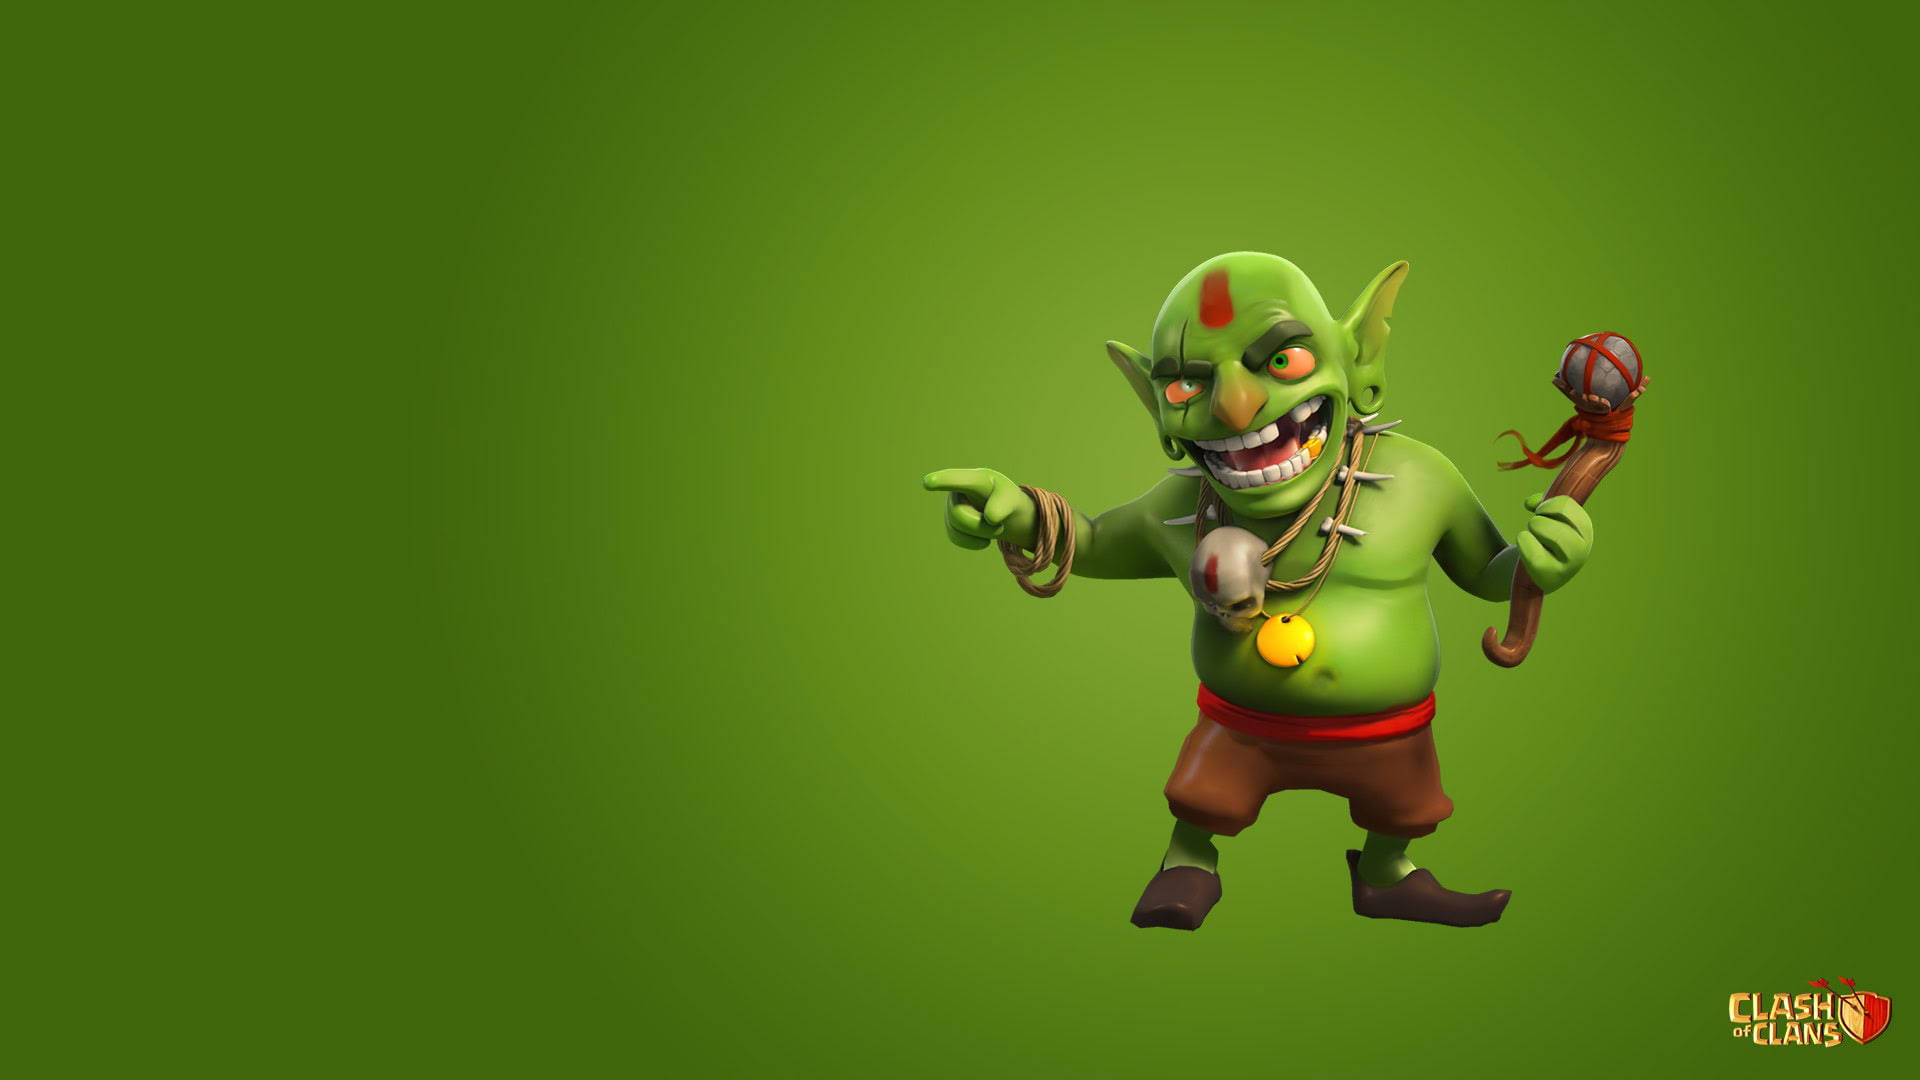 Green Goblin Laughing Clash Of Clans Wallpaper